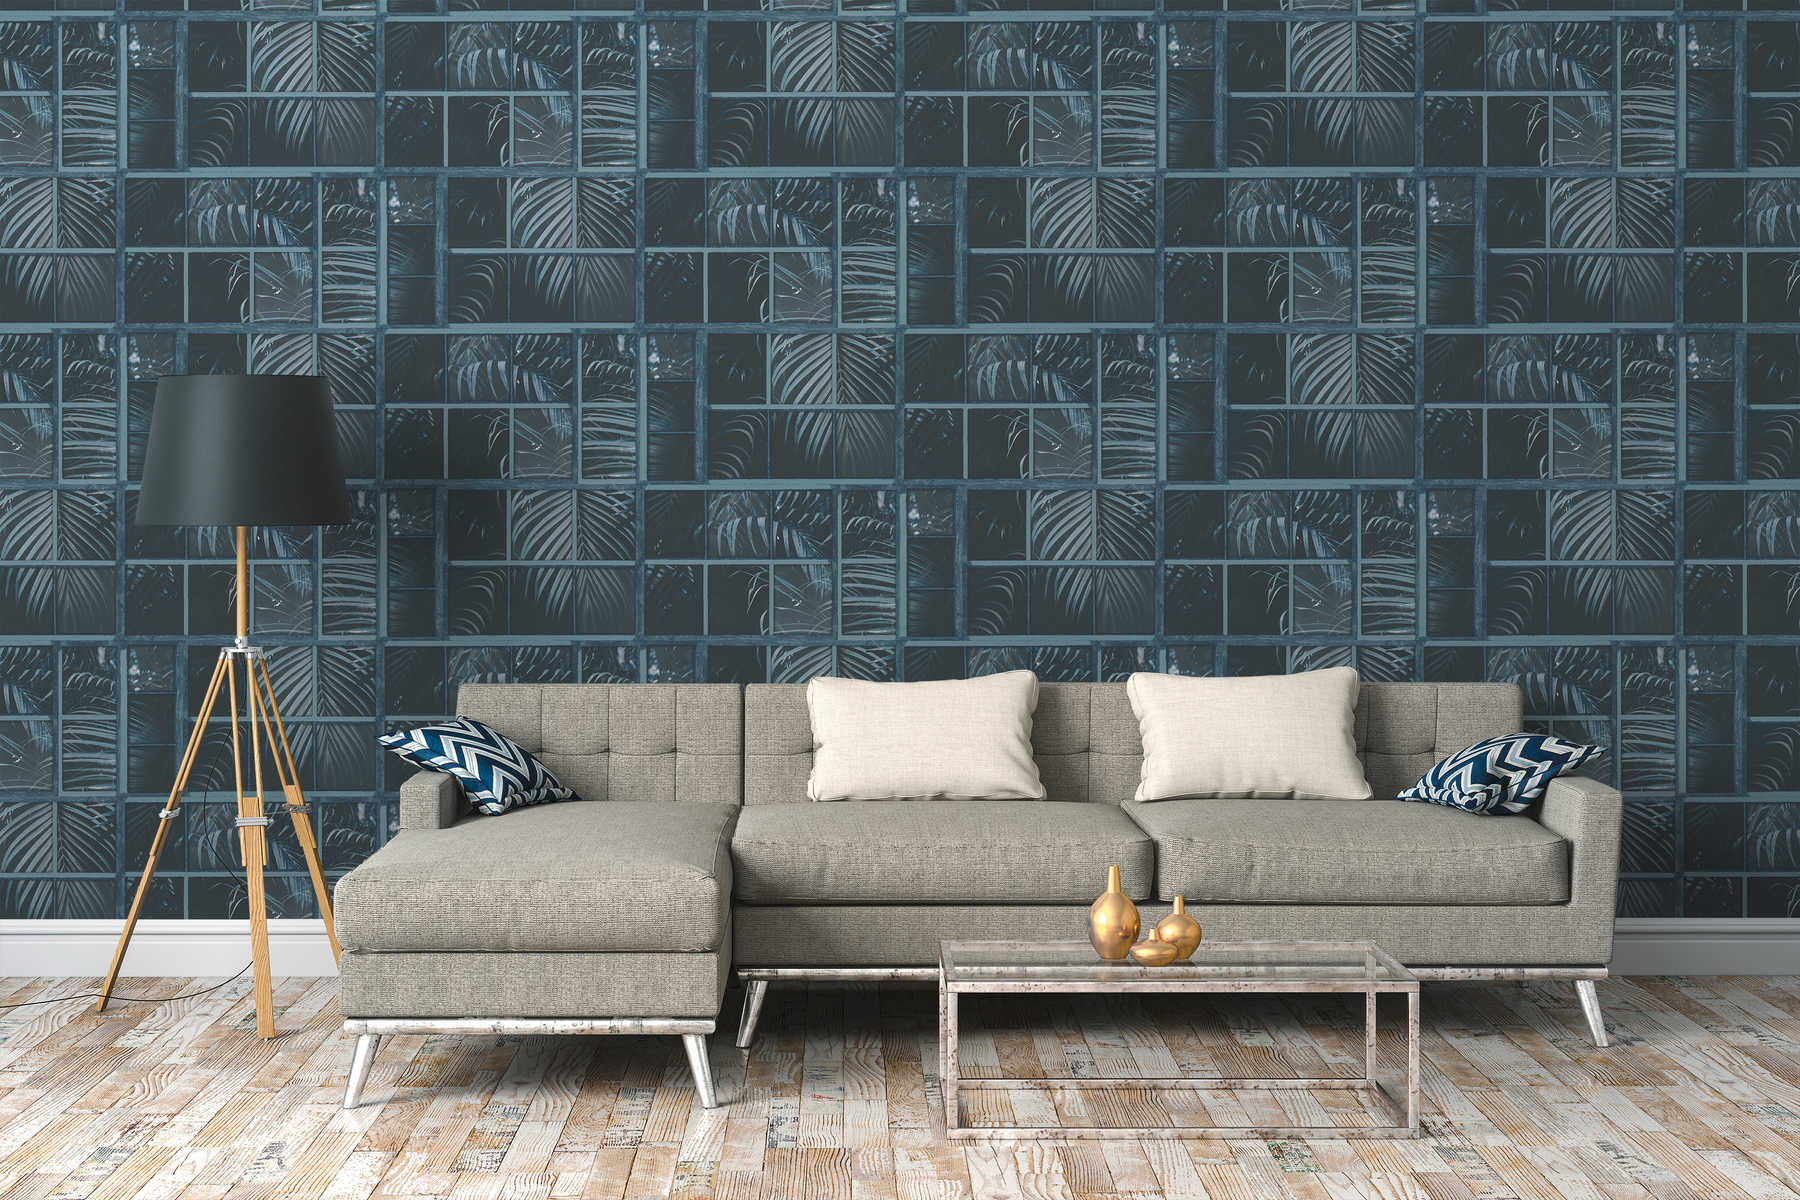             Wallpaper window with jungle view & 3D effect - Blue, Black
        